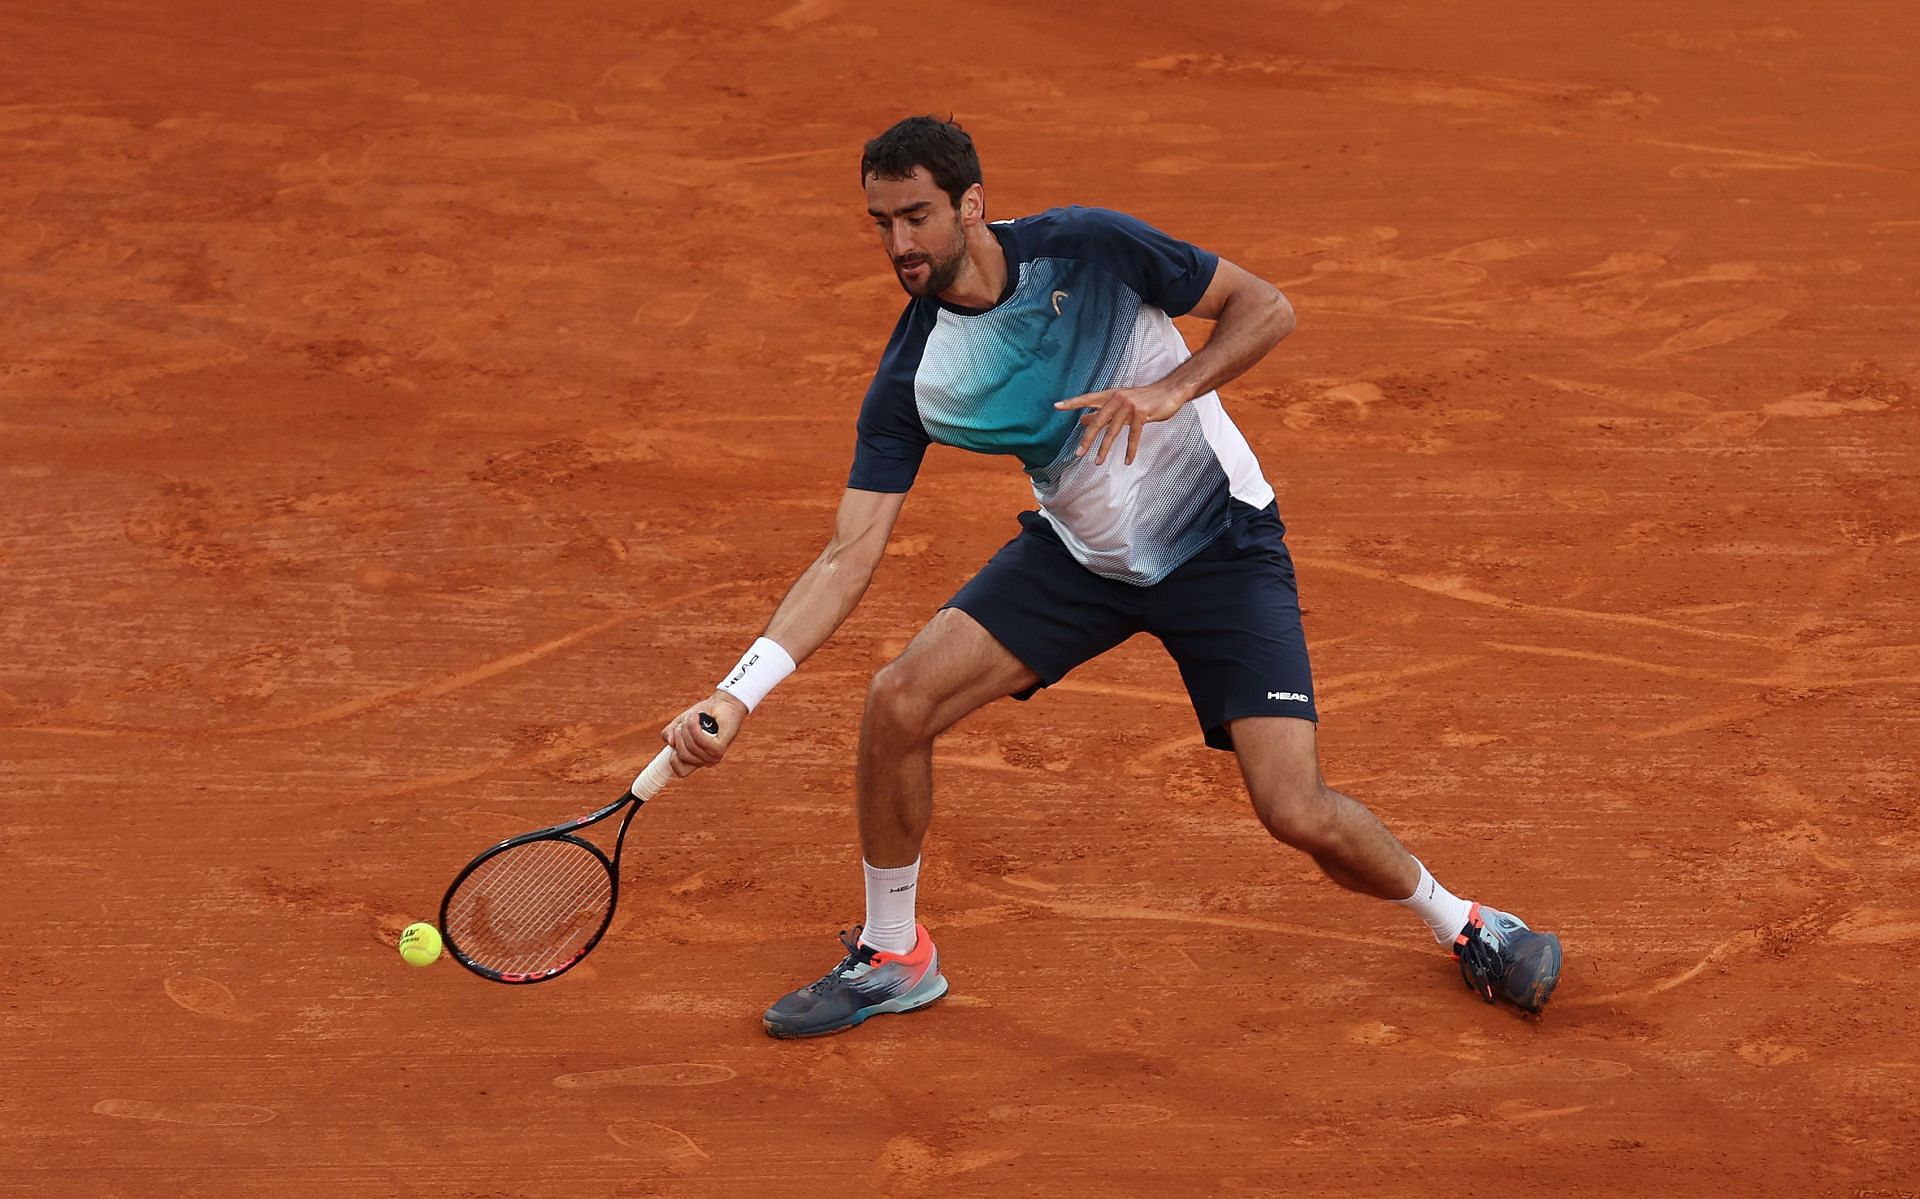 Marin Cilic in action at the Rolex Monte-Carlo Masters